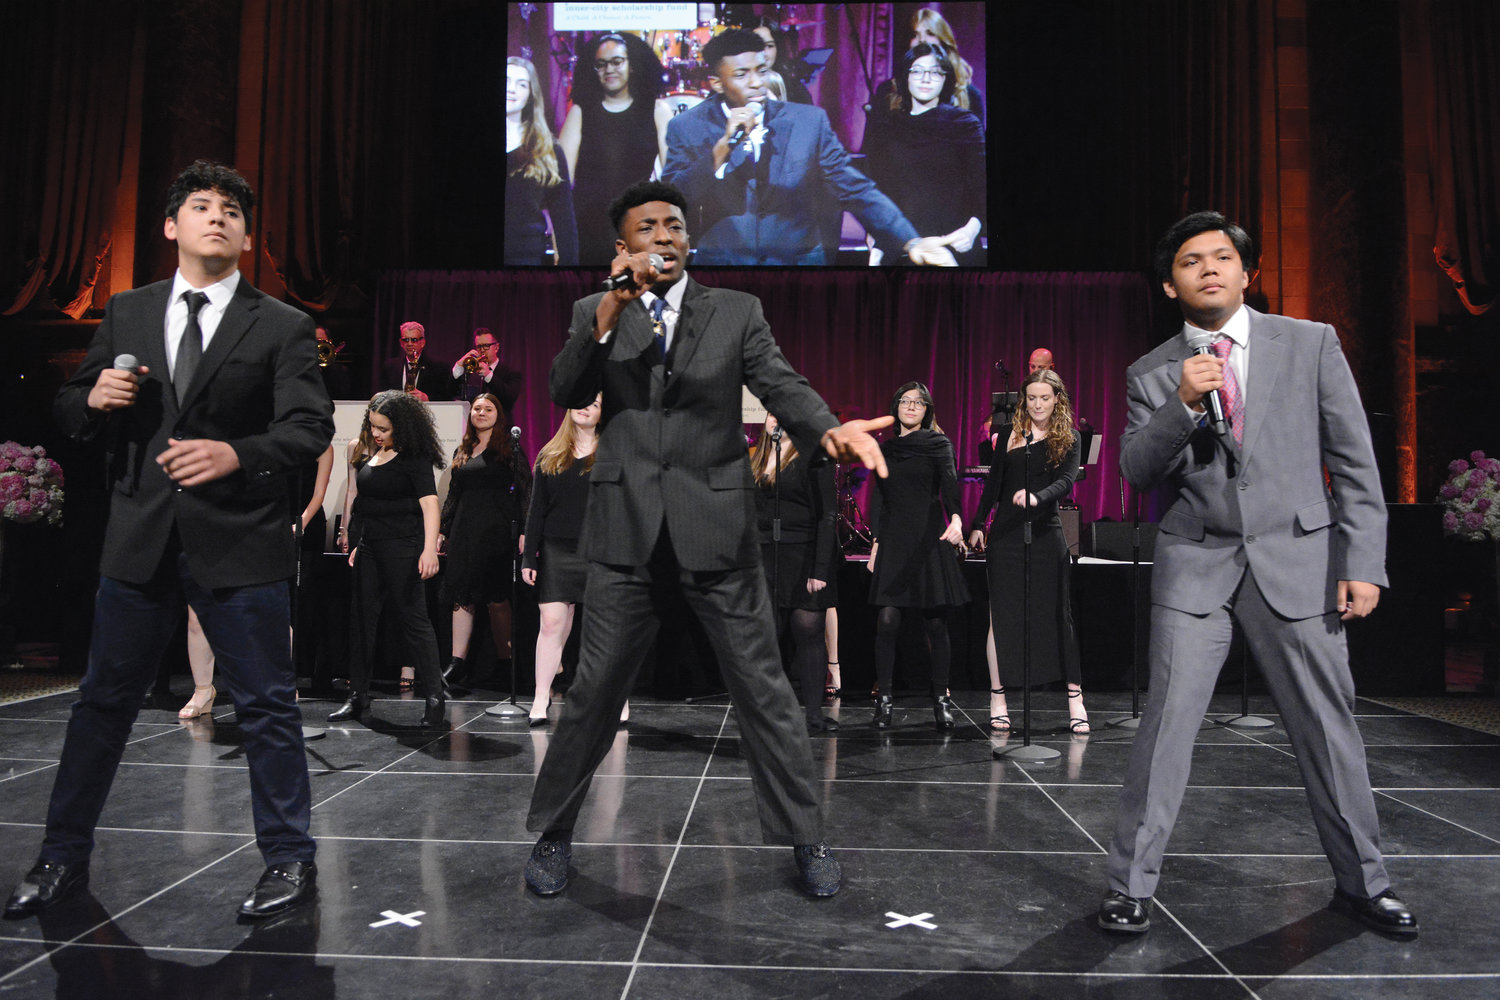 Students from Cardinal Spellman High School in the Bronx and Notre Dame School in Manhattan perform May 10 during the 45th annual Inner-City Scholarship Fund Friends Gala at Cipriani 42nd Street in Manhattan.